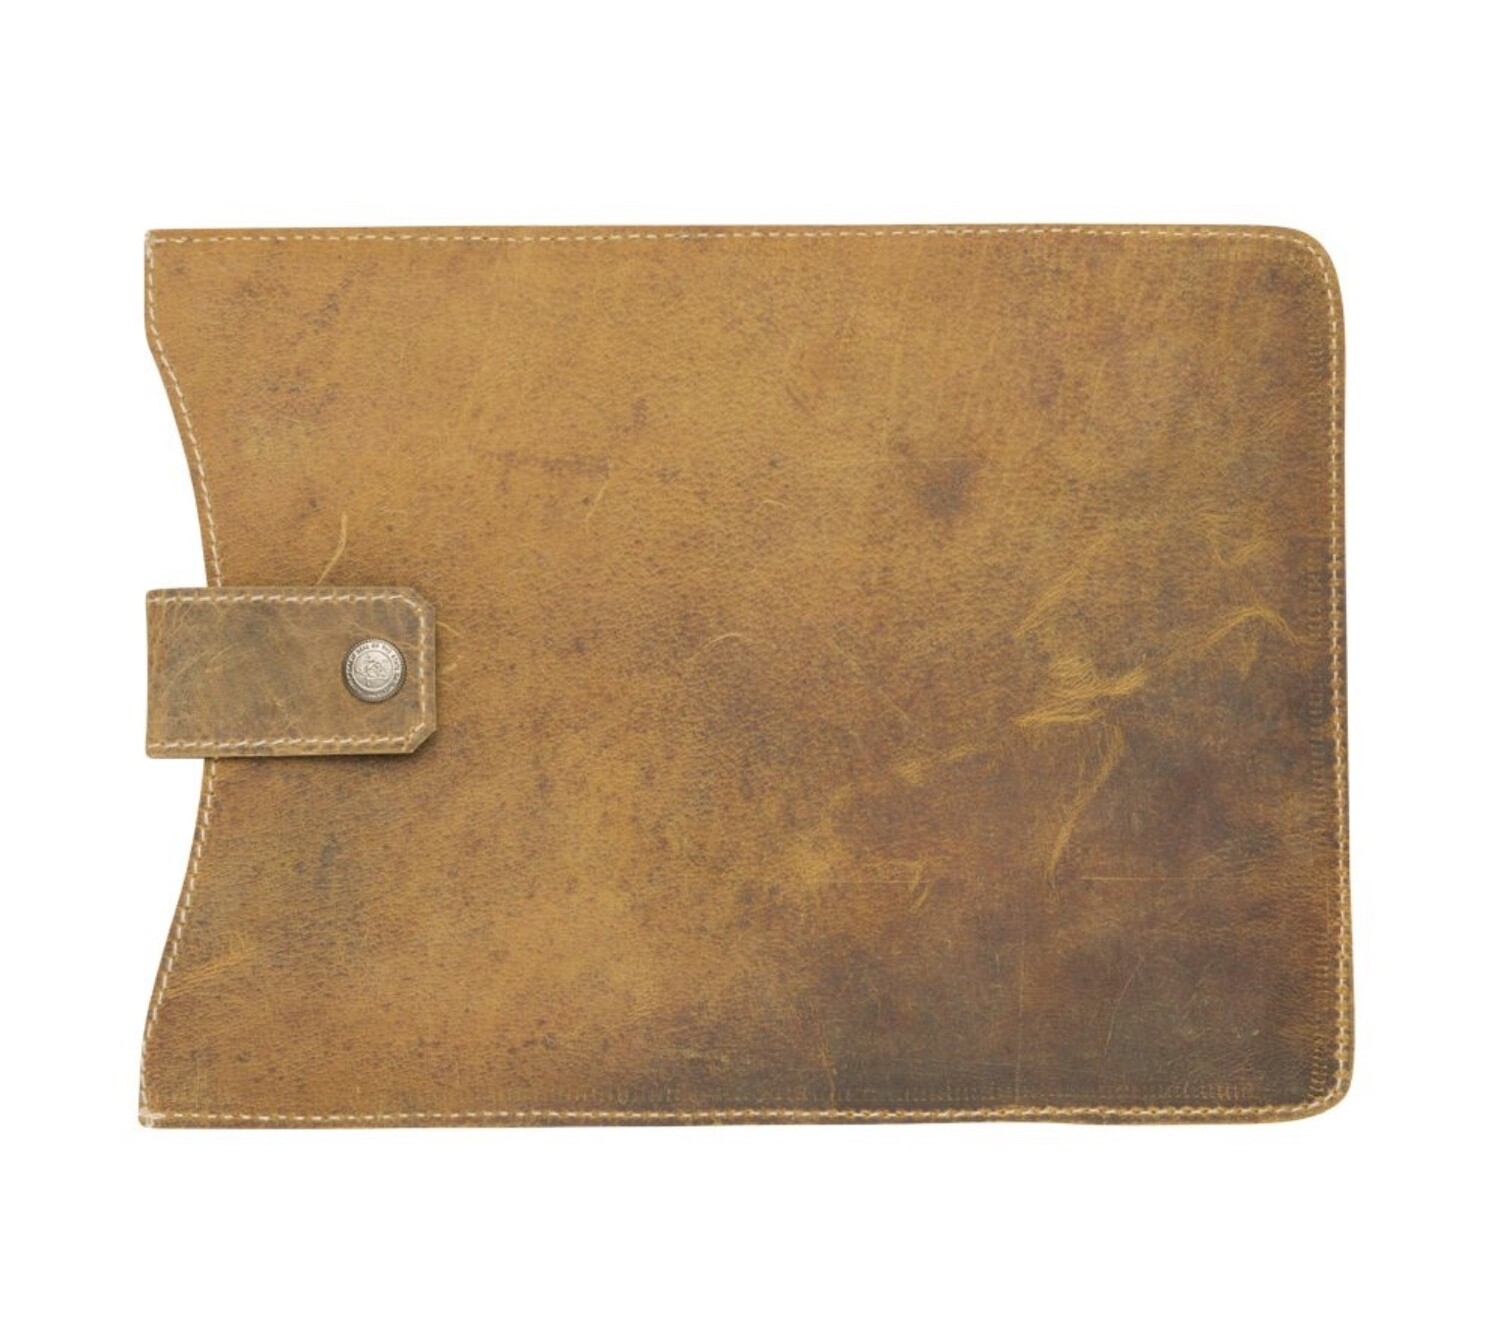 Western Brown Leather IPAD Cover